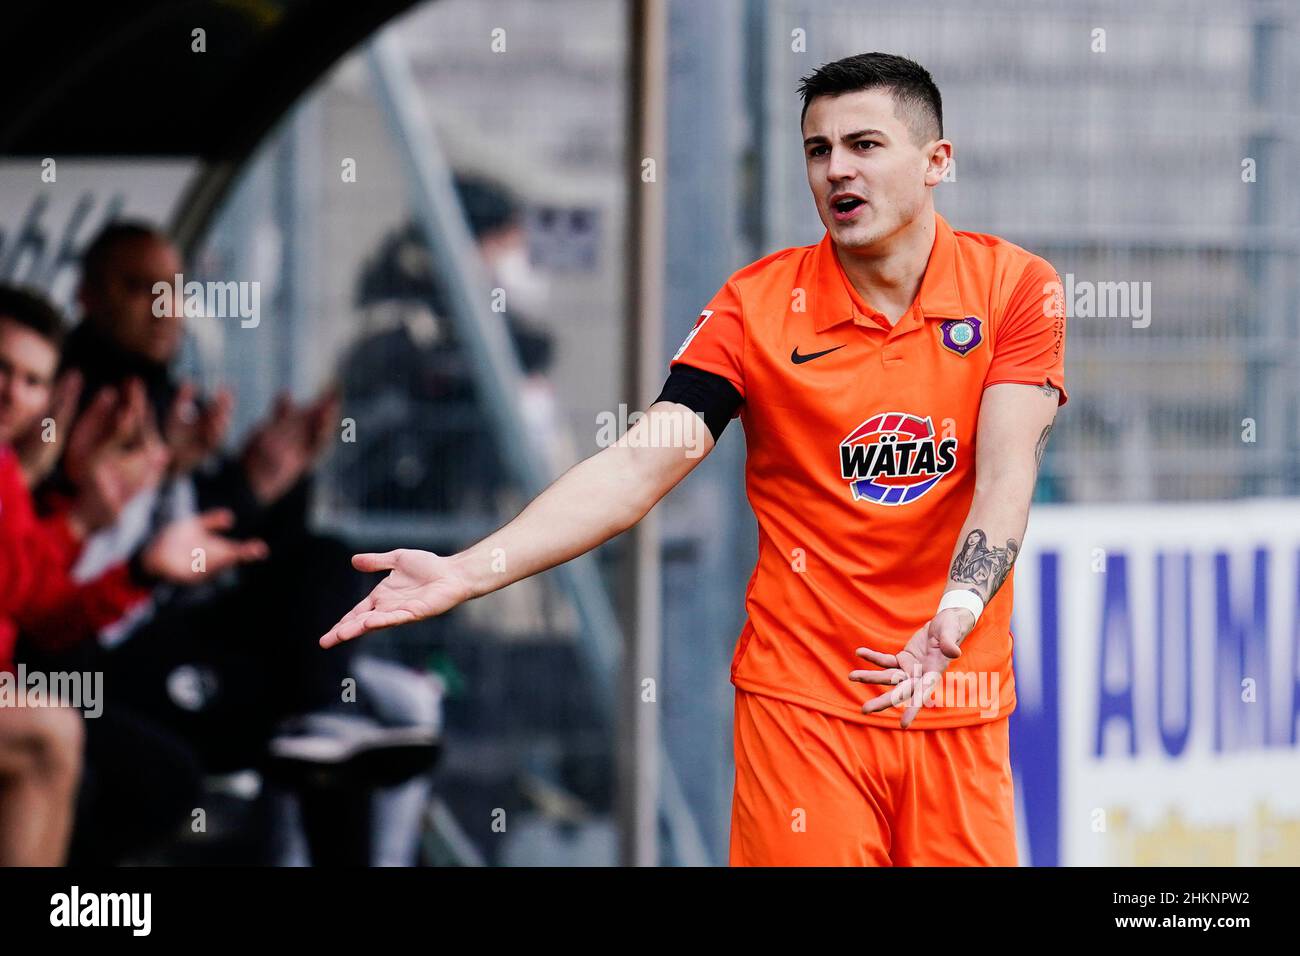 Sandhausen, Germany. 05th Feb, 2022. Soccer: 2. Bundesliga, SV Sandhausen - FC Erzgebirge Aue, Matchday 21, BWT-Stadion am Hardtwald. Antonio Jonjic of Erzgebirge Aue gestures. Credit: Uwe Anspach/dpa - IMPORTANT NOTE: In accordance with the requirements of the DFL Deutsche Fußball Liga and the DFB Deutscher Fußball-Bund, it is prohibited to use or have used photographs taken in the stadium and/or of the match in the form of sequence pictures and/or video-like photo series./dpa/Alamy Live News Stock Photo